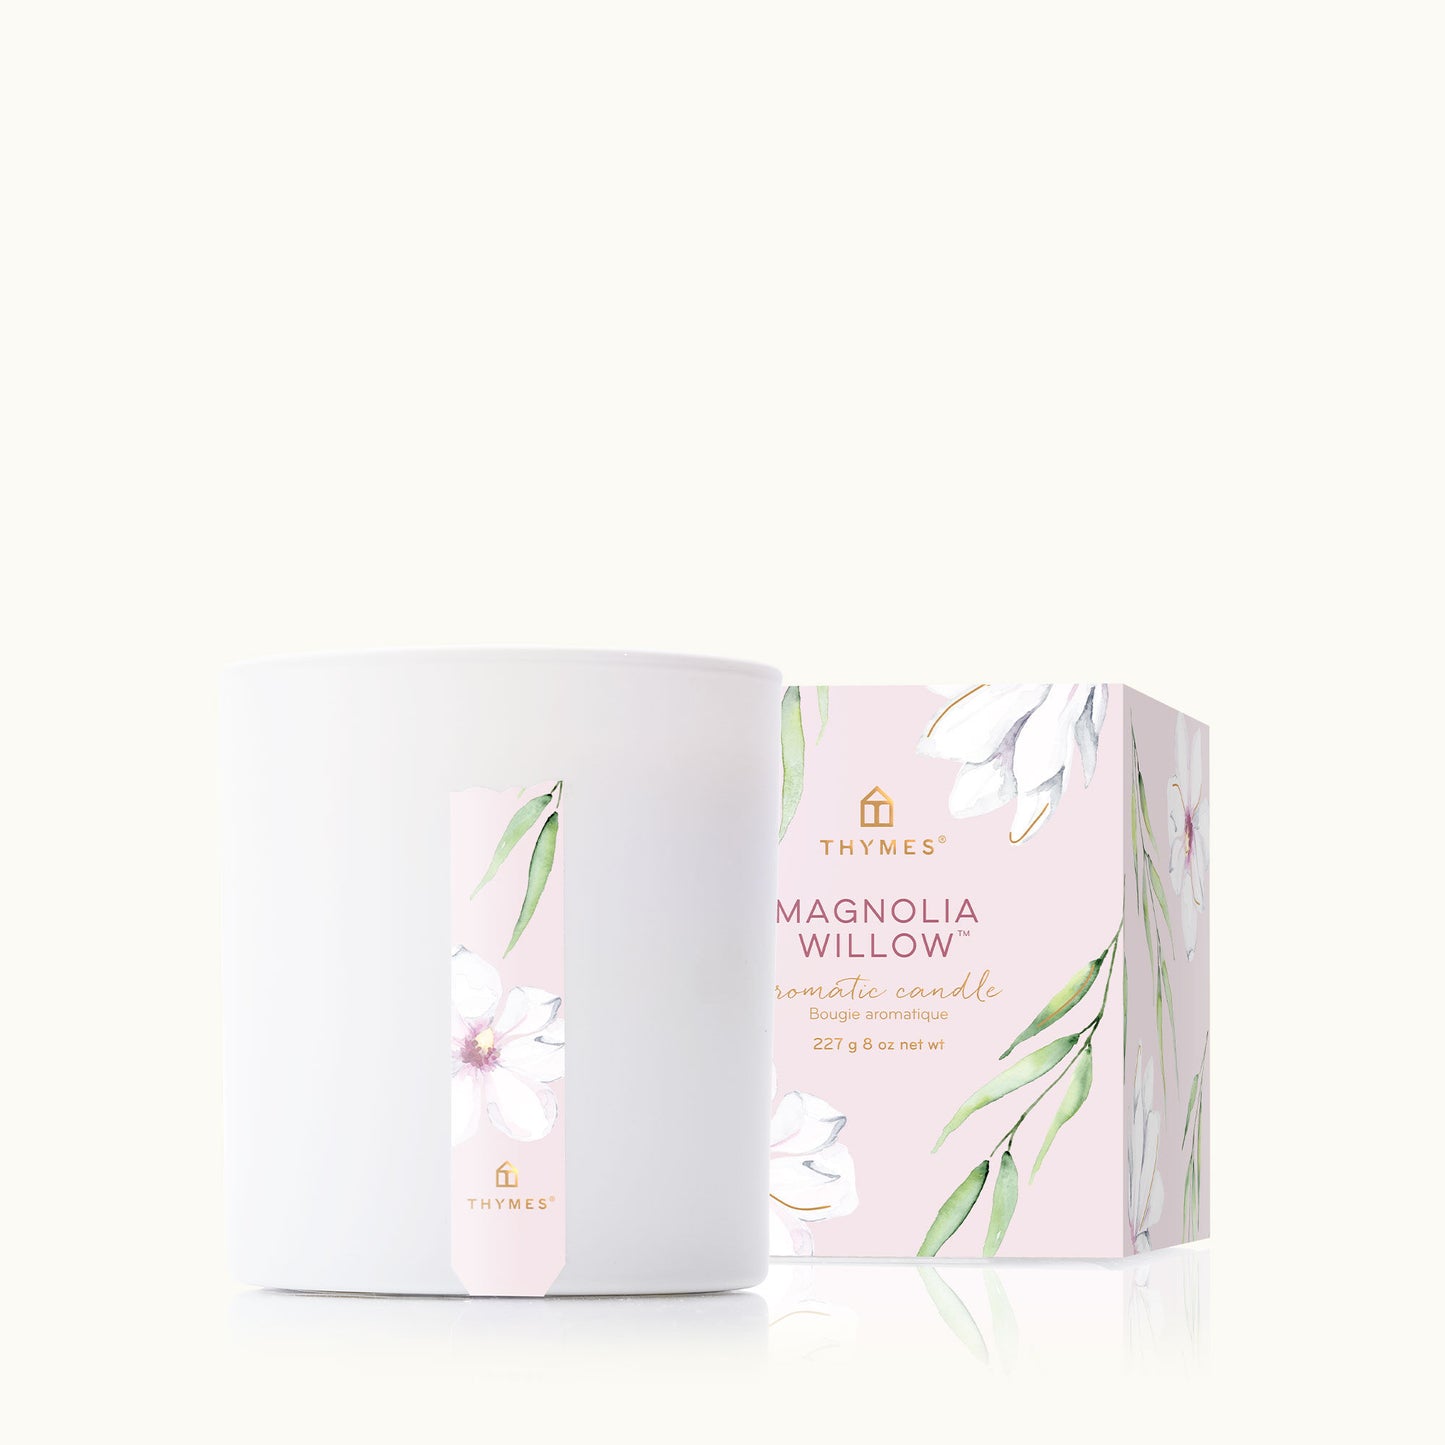 Magnolia Willow Poured Candle Gifts Thymes   